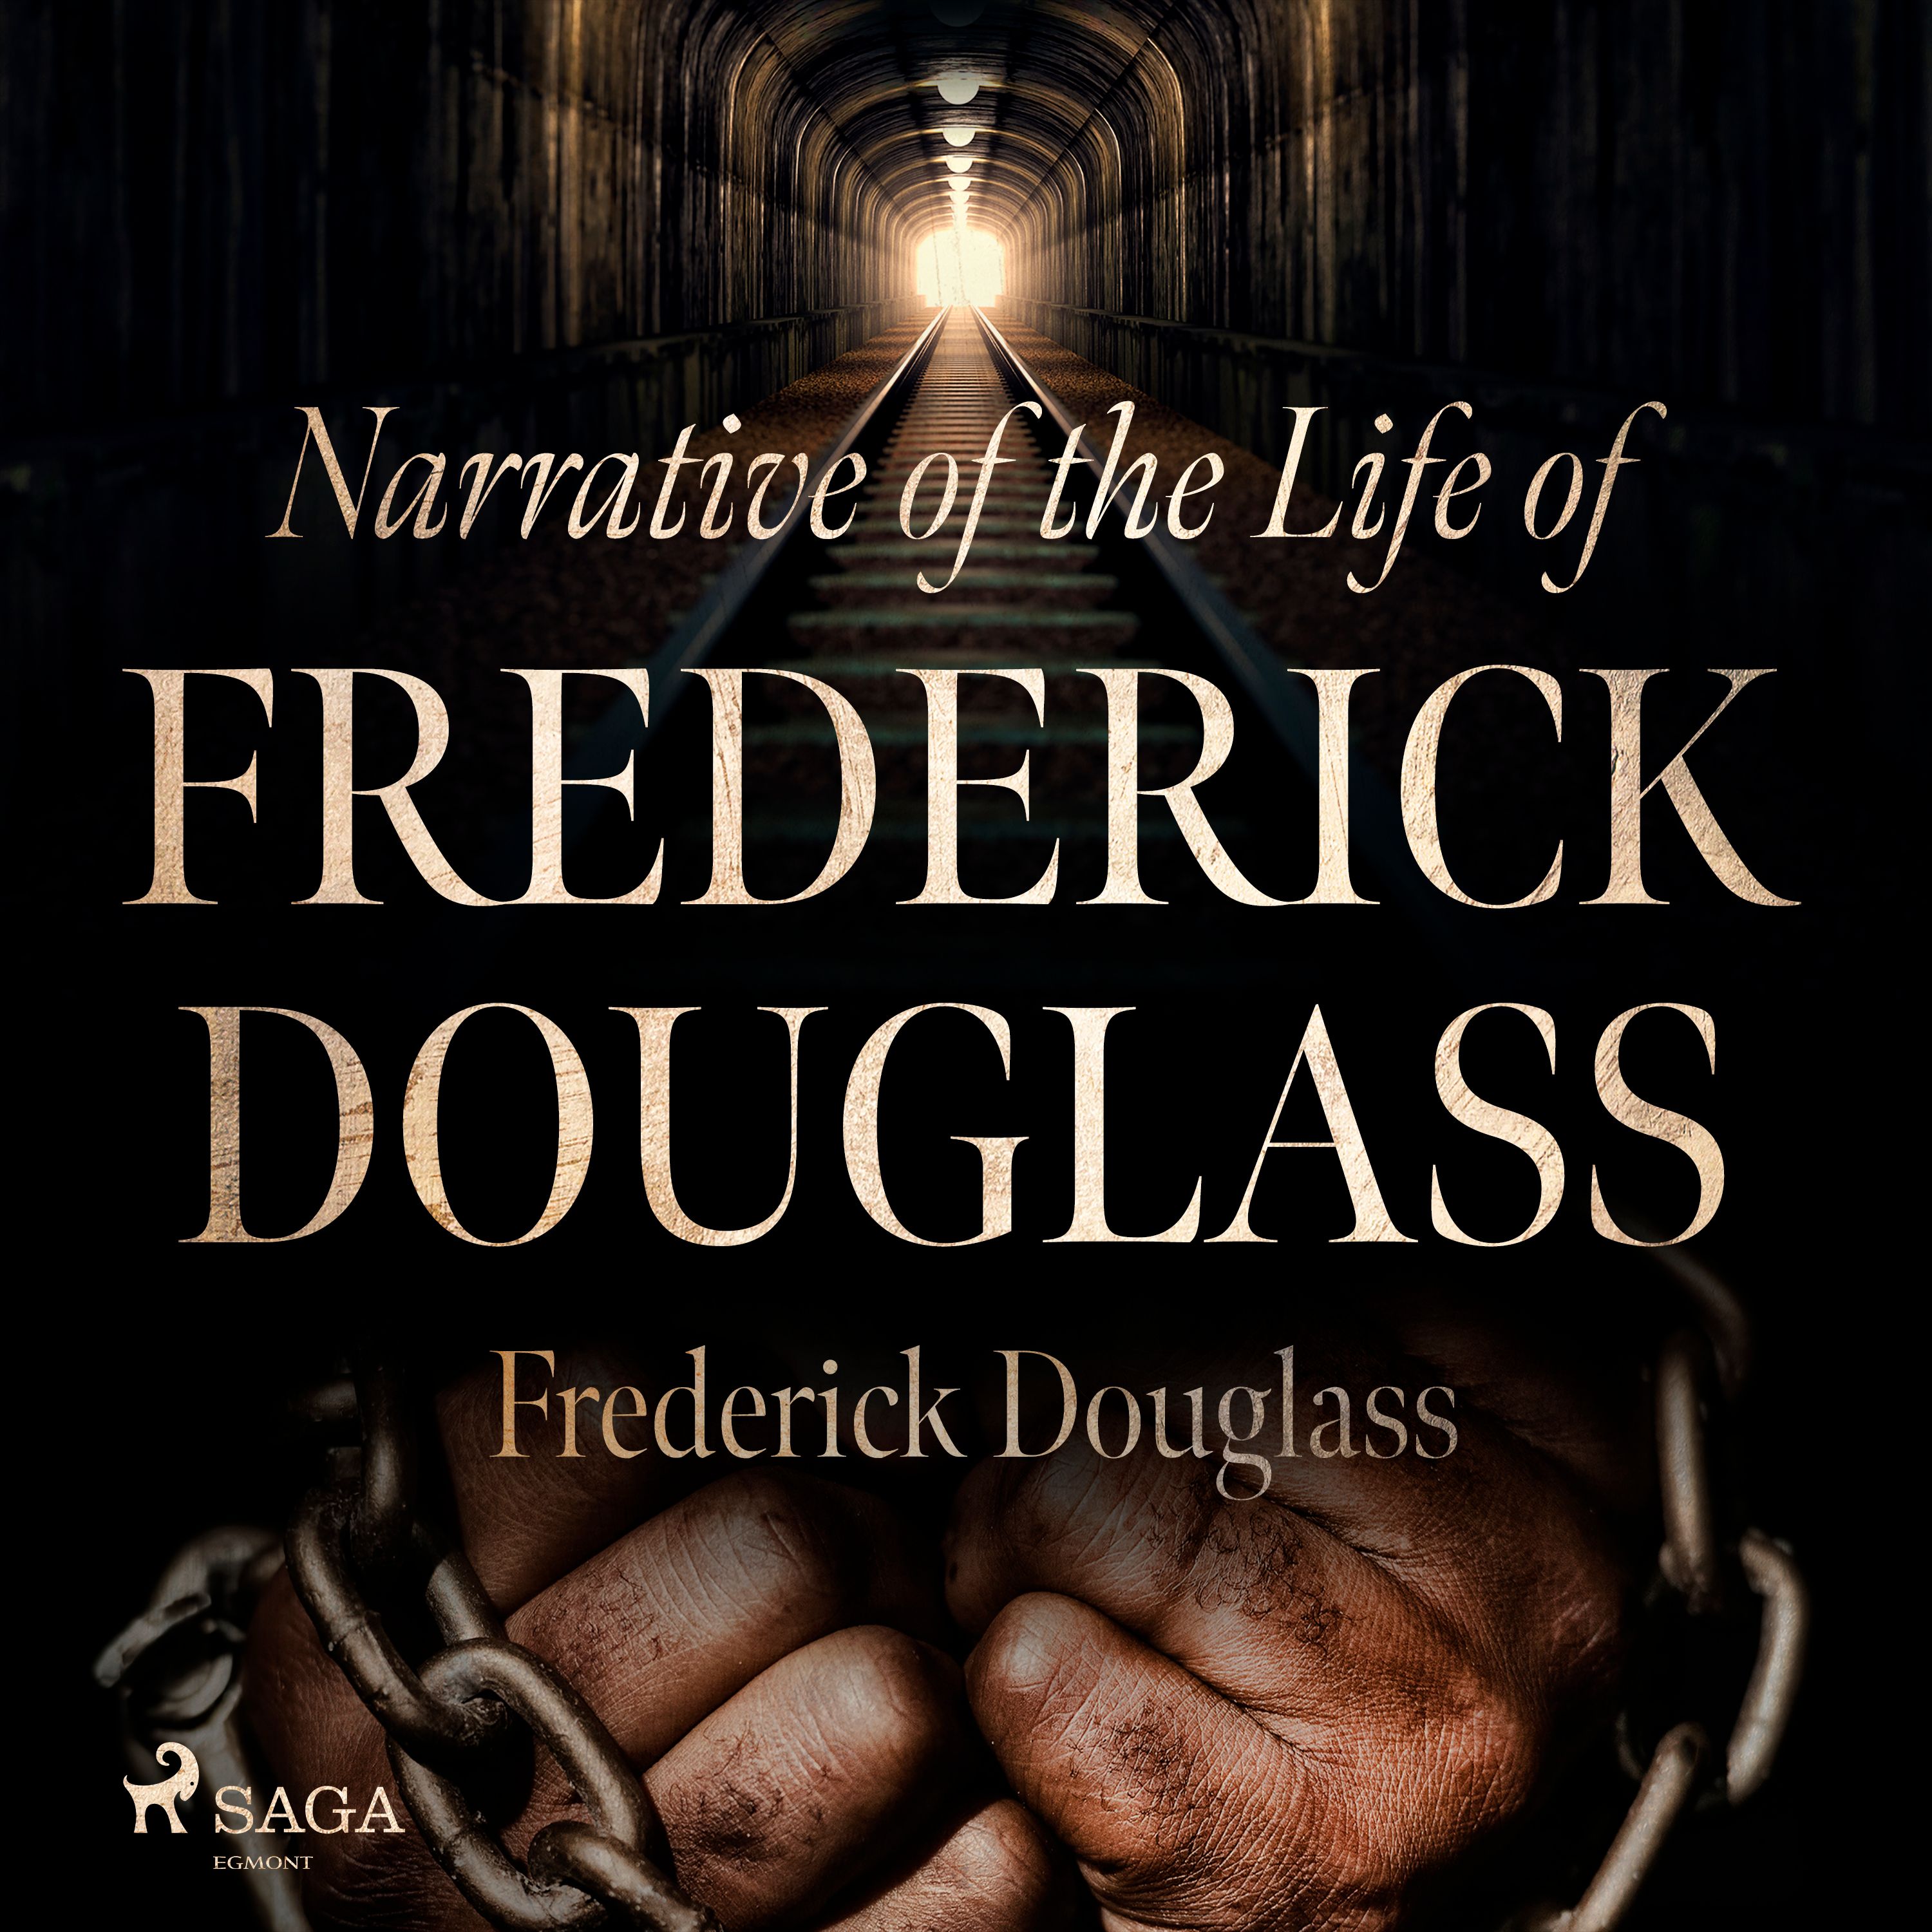 Narrative of the Life of Frederick Douglass, audiobook by Frederick Douglass